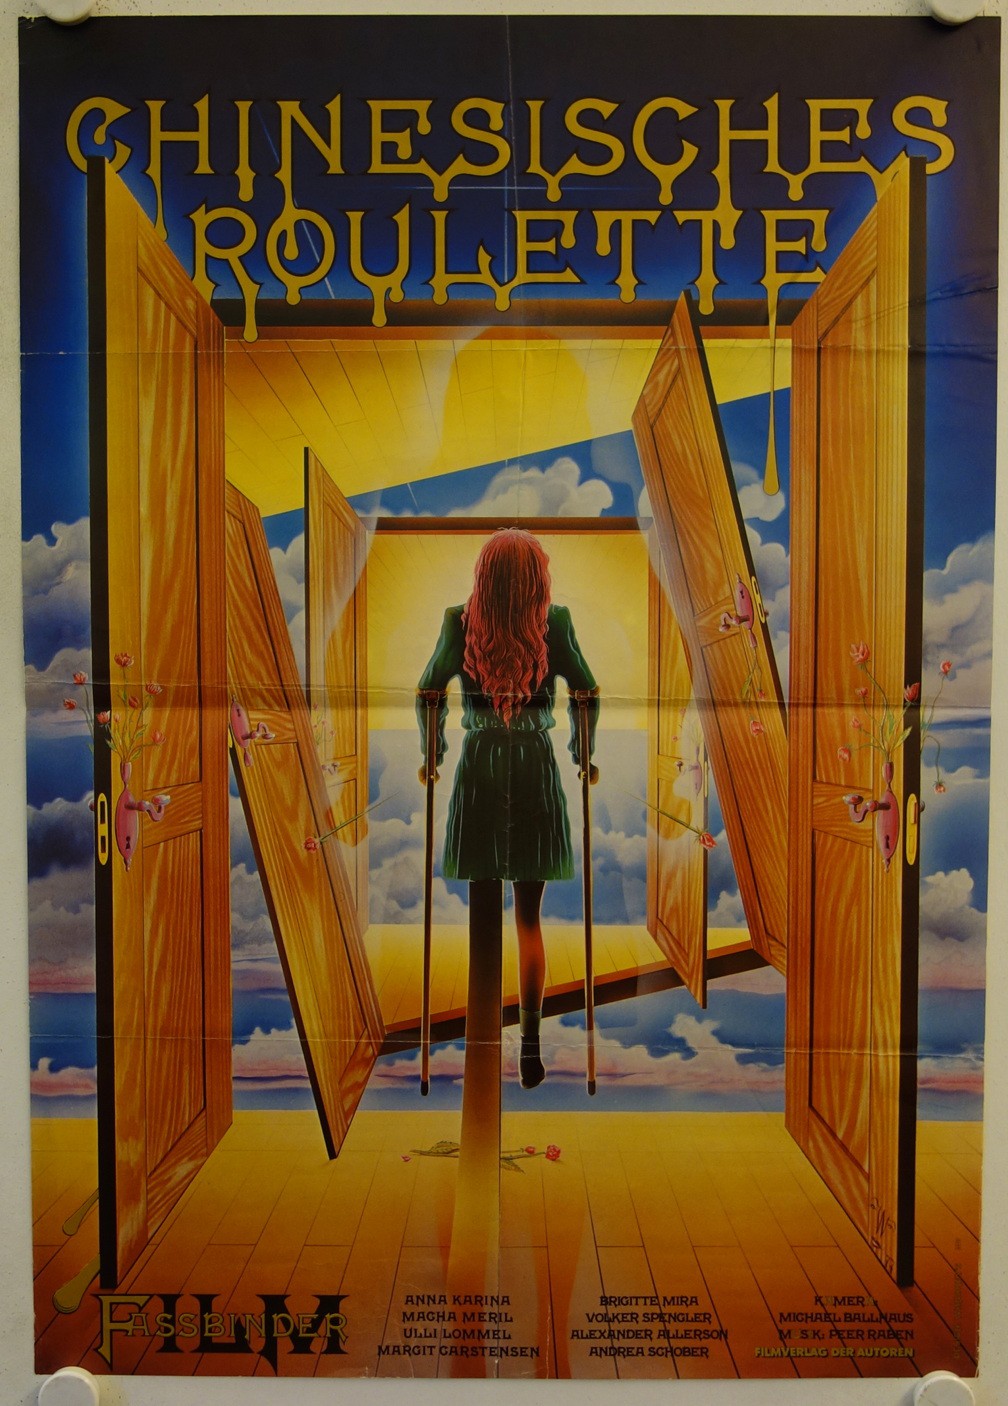 Movie poster for Chinese Roulette